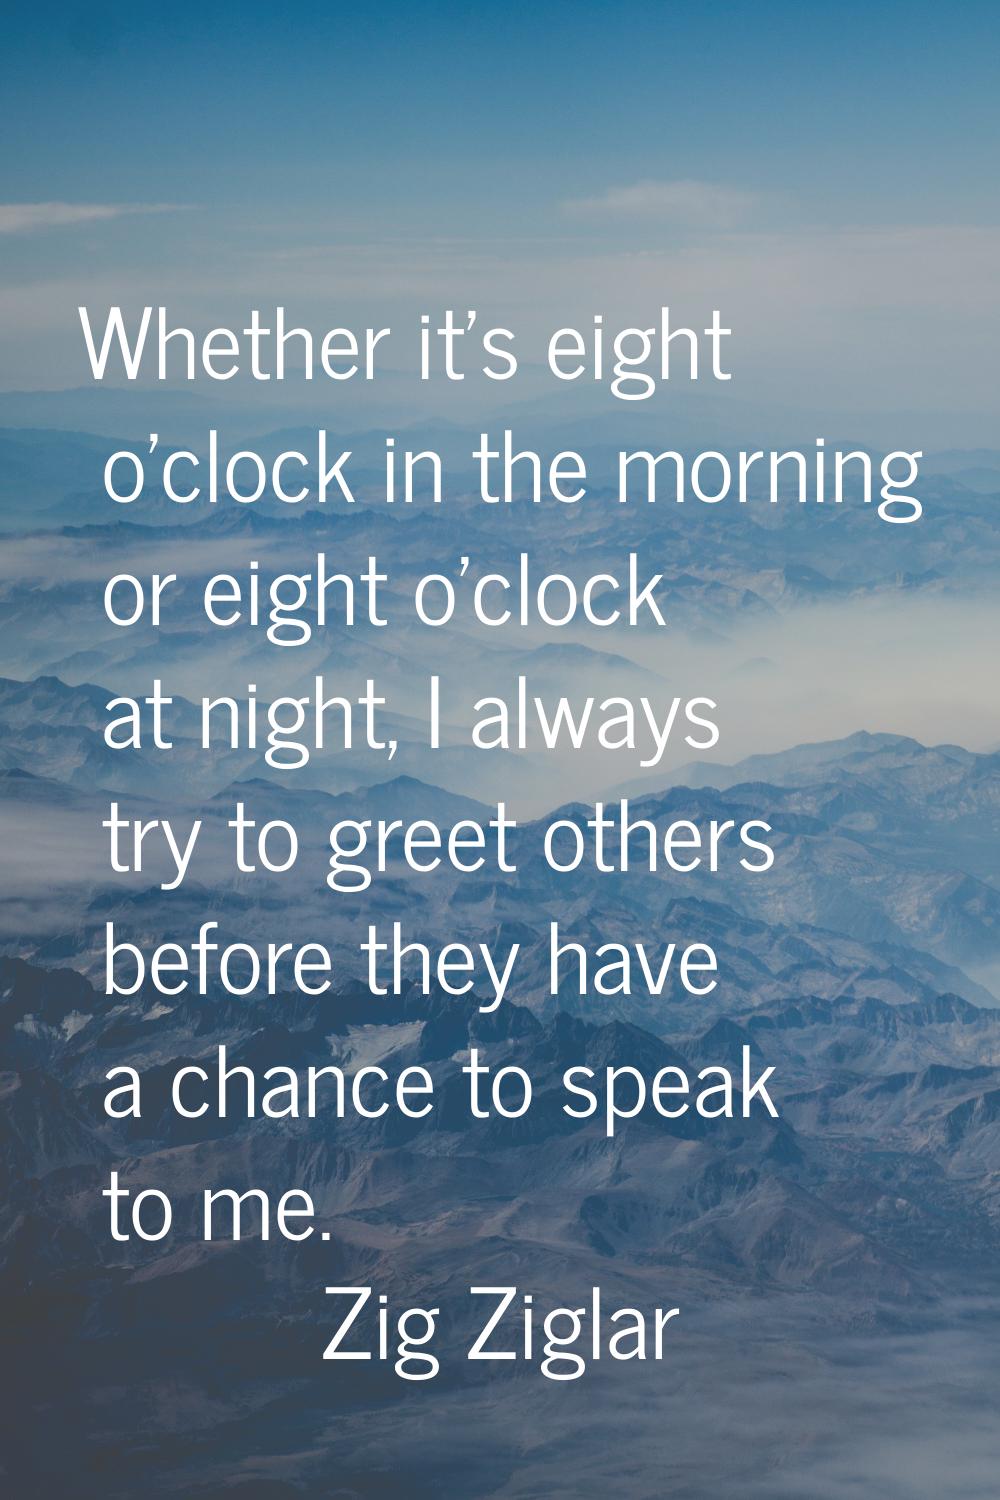 Whether it's eight o'clock in the morning or eight o'clock at night, I always try to greet others b